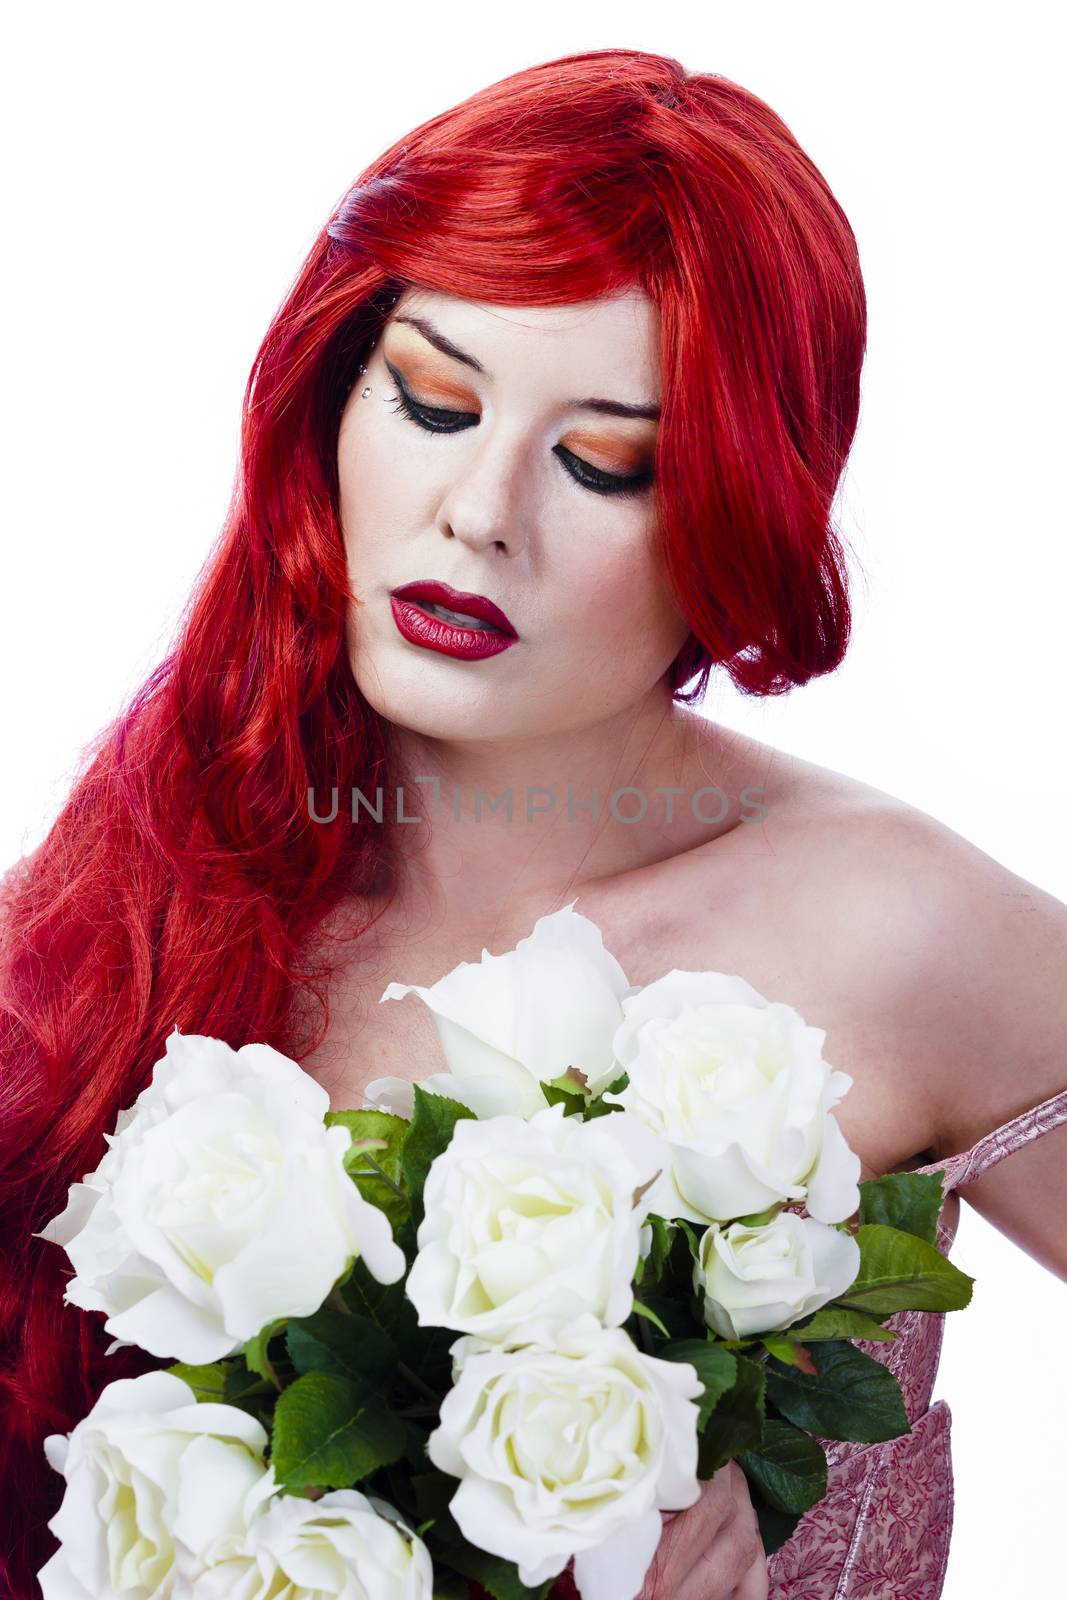 elegant and beautiful woman with red hair holding a bouquet of white roses